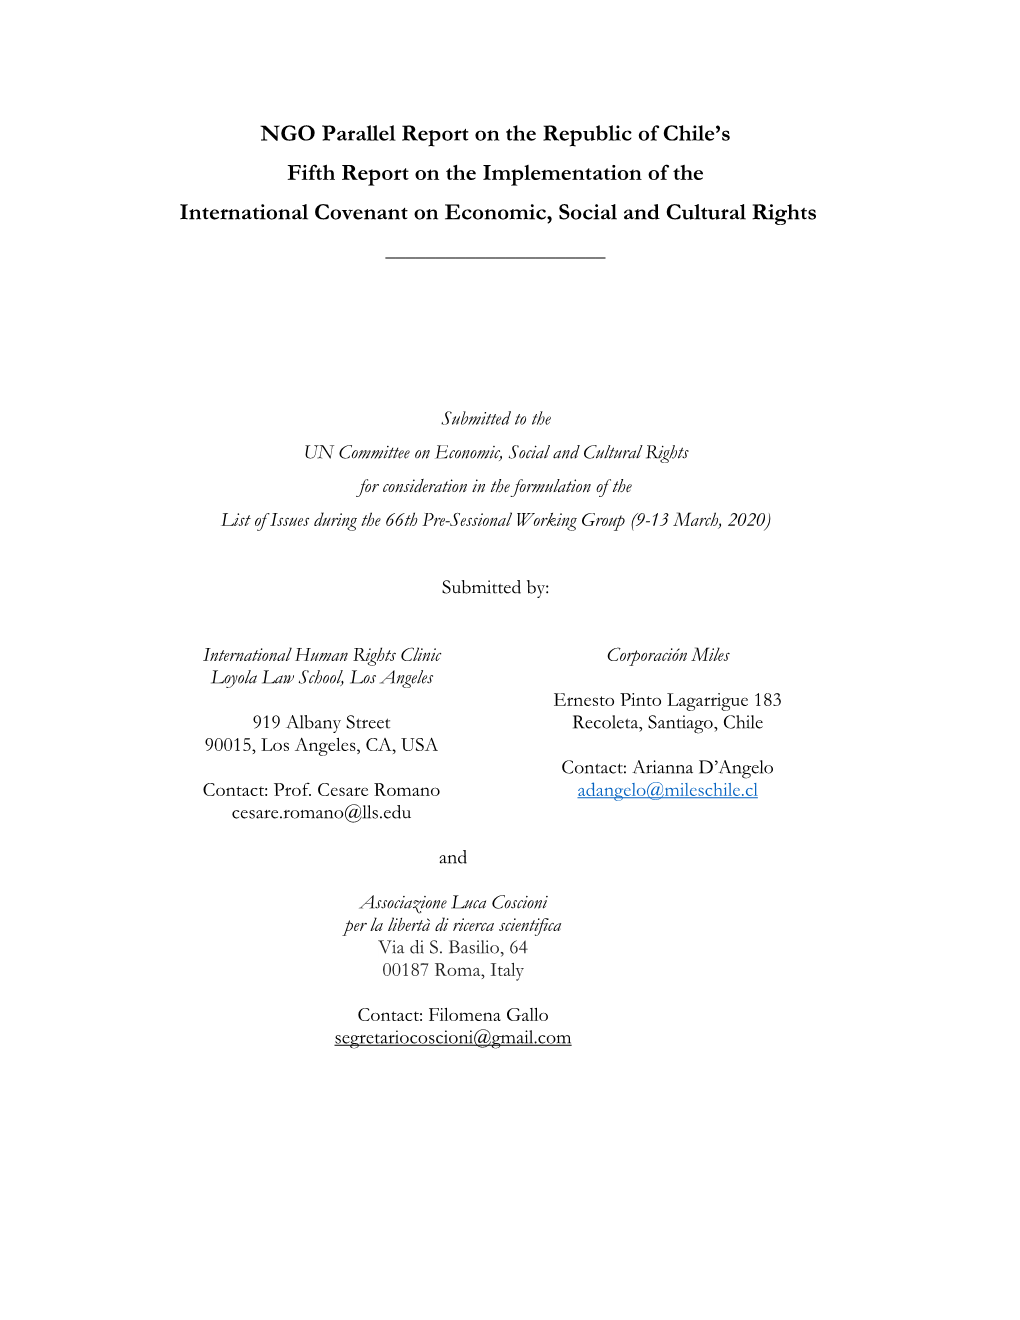 Chile’S Fifth Report on the Implementation of the International Covenant on Economic, Social and Cultural Rights ______